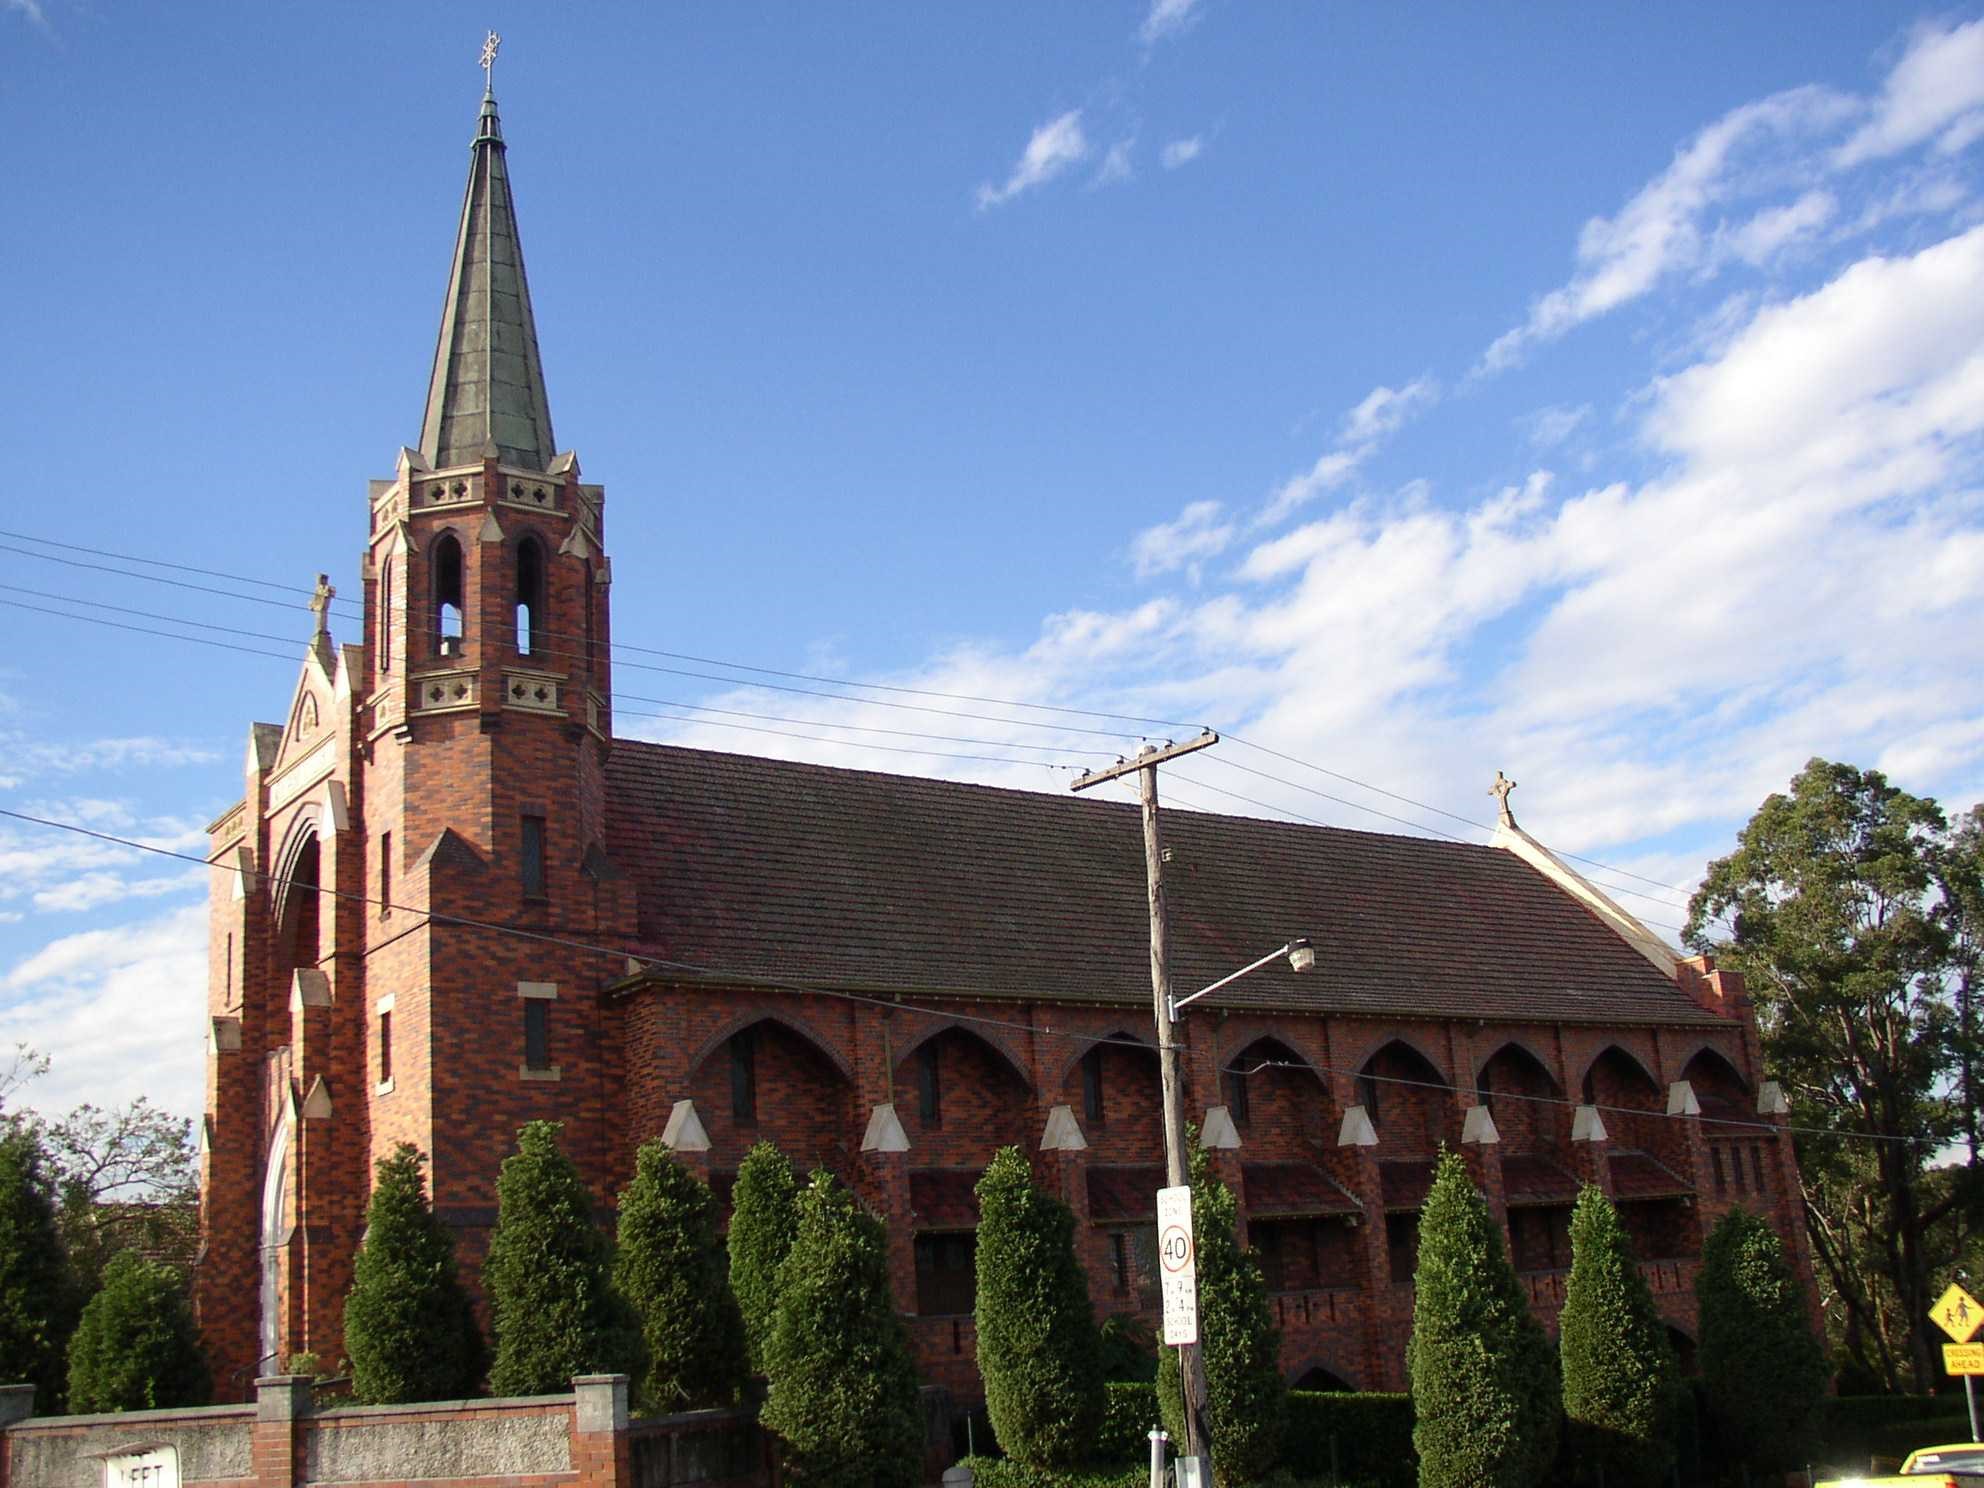 This is an image of the local heritage place known as Mary Immaculate Catholic Church